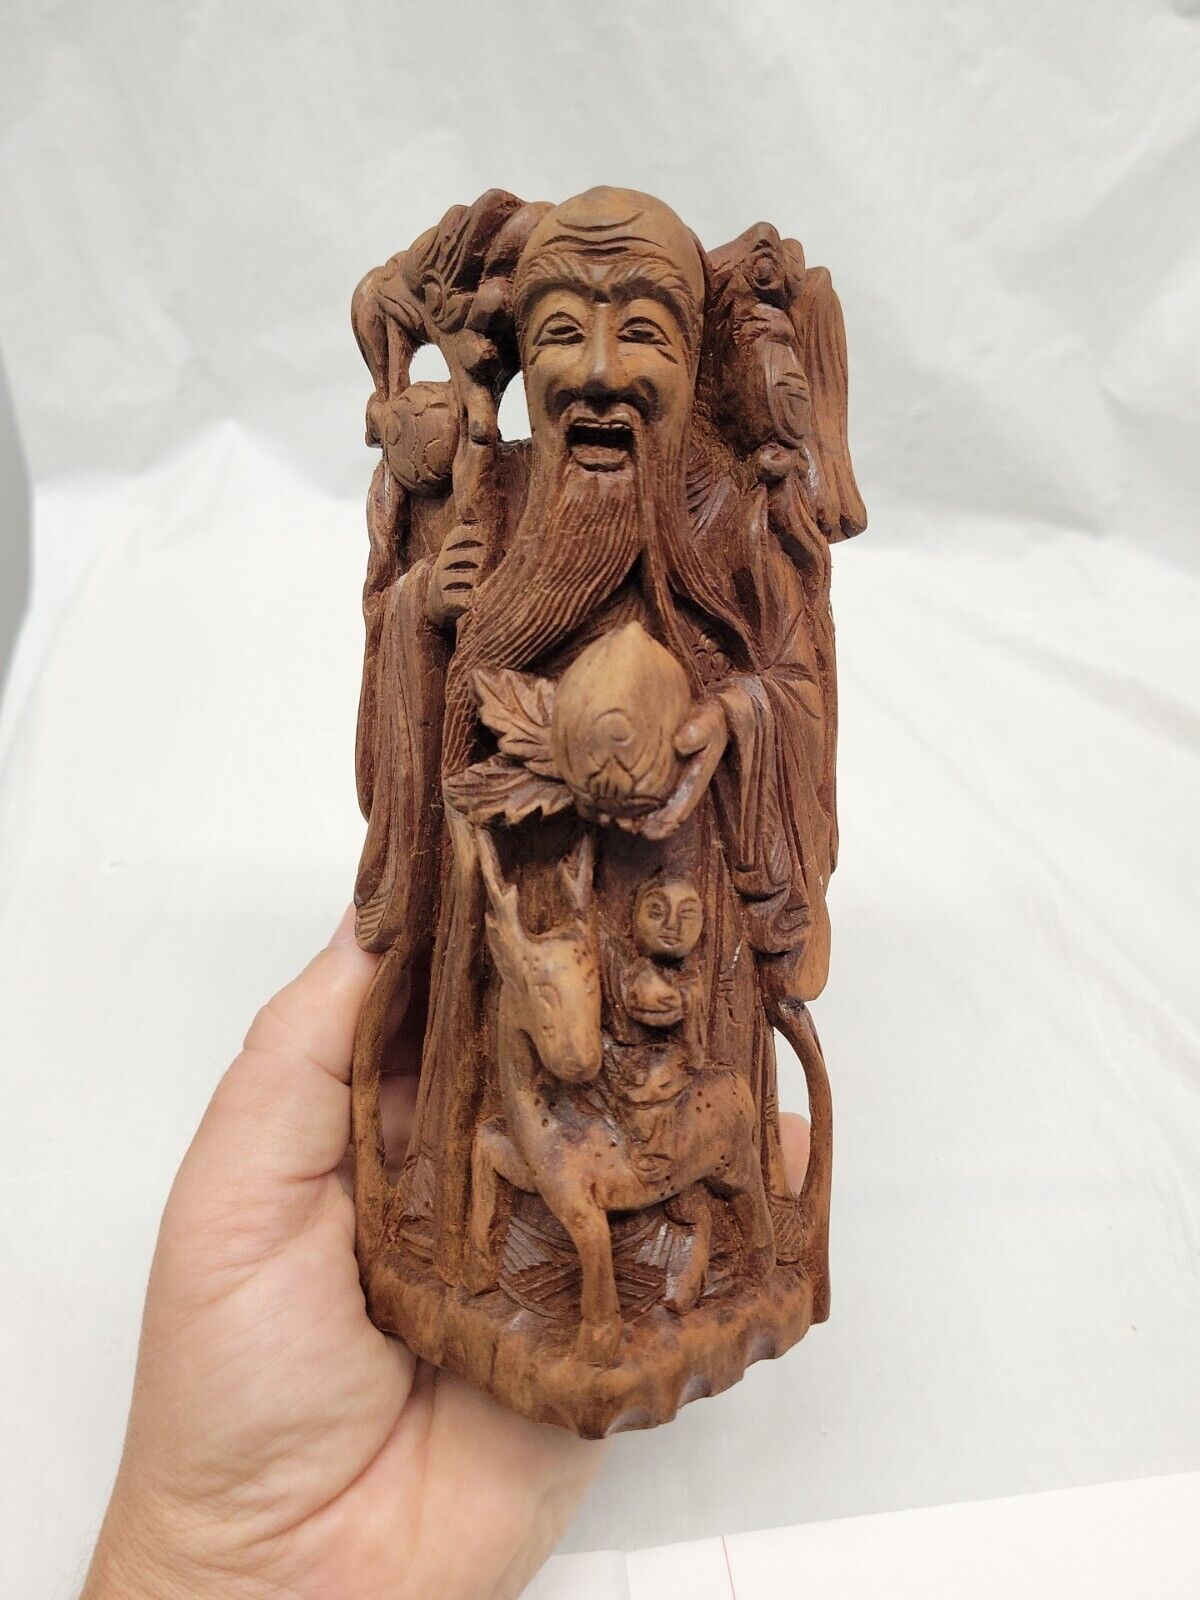 Chinese Carved Wood Figurine /  Chinese Wise Man Statue 7 Inch  # 5073